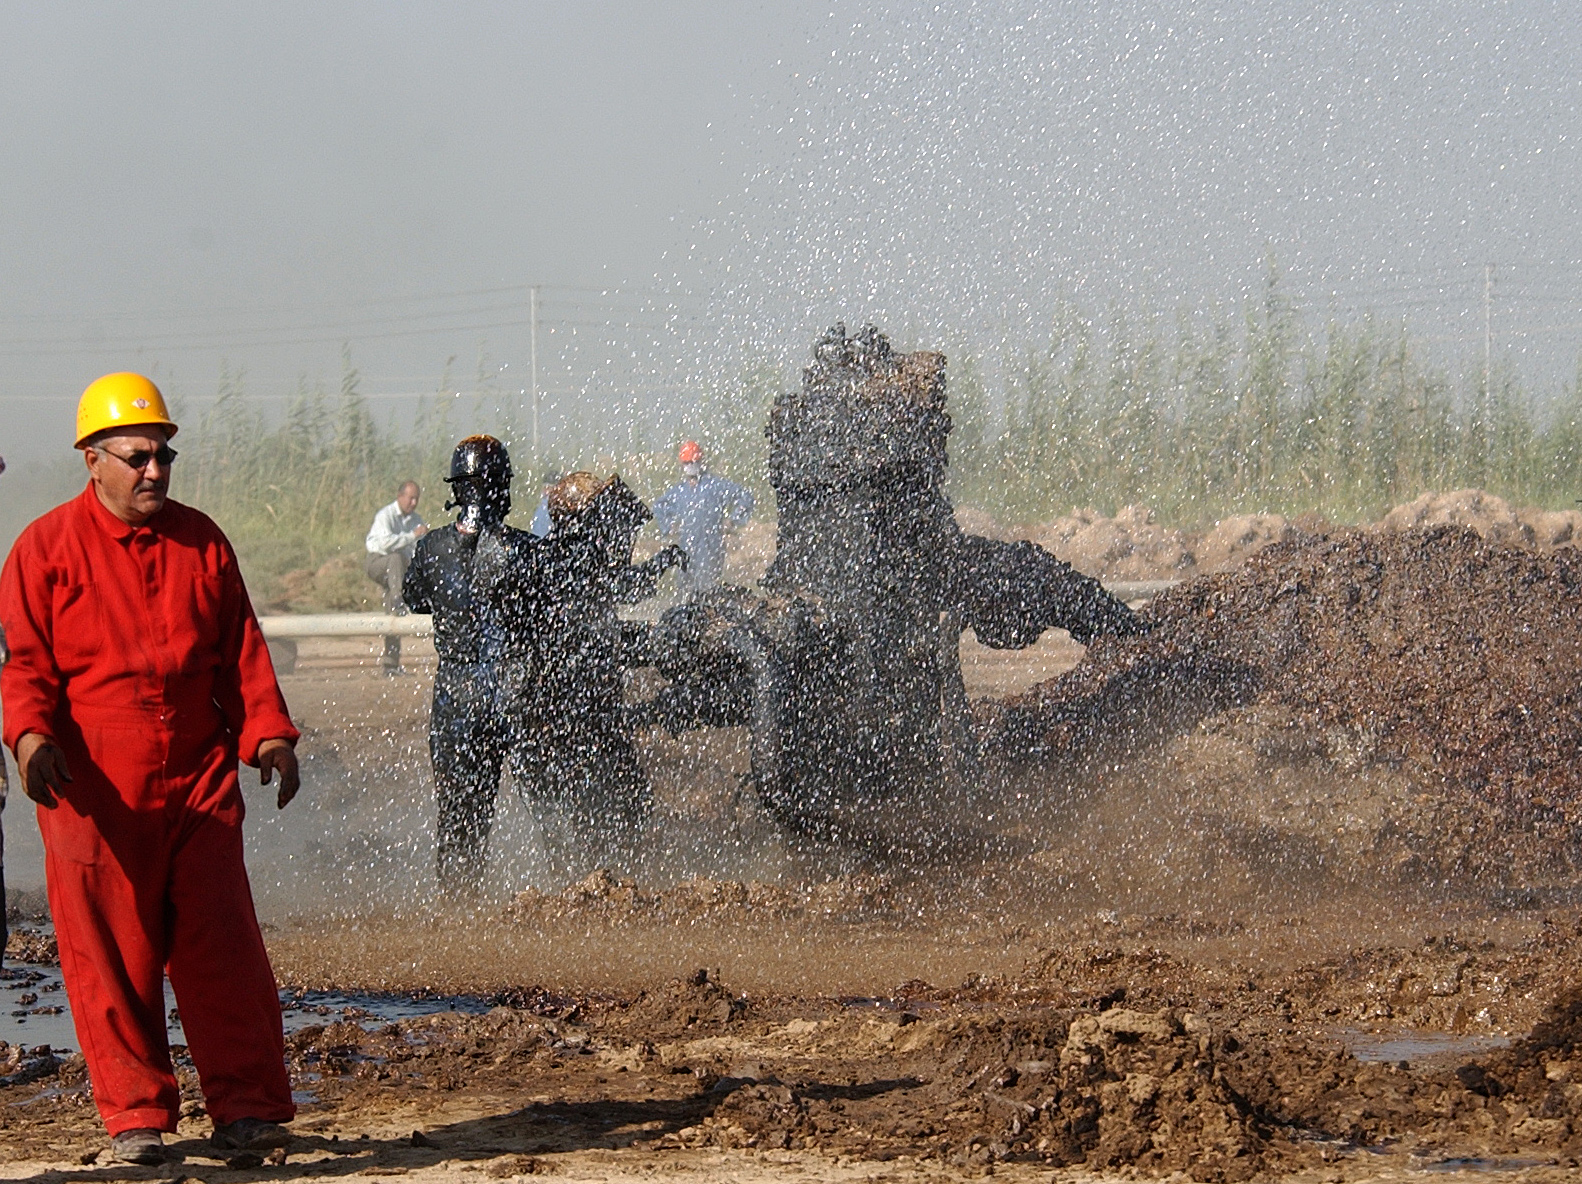 Oil engineers spray water to cool off oil wells in northern Iraq